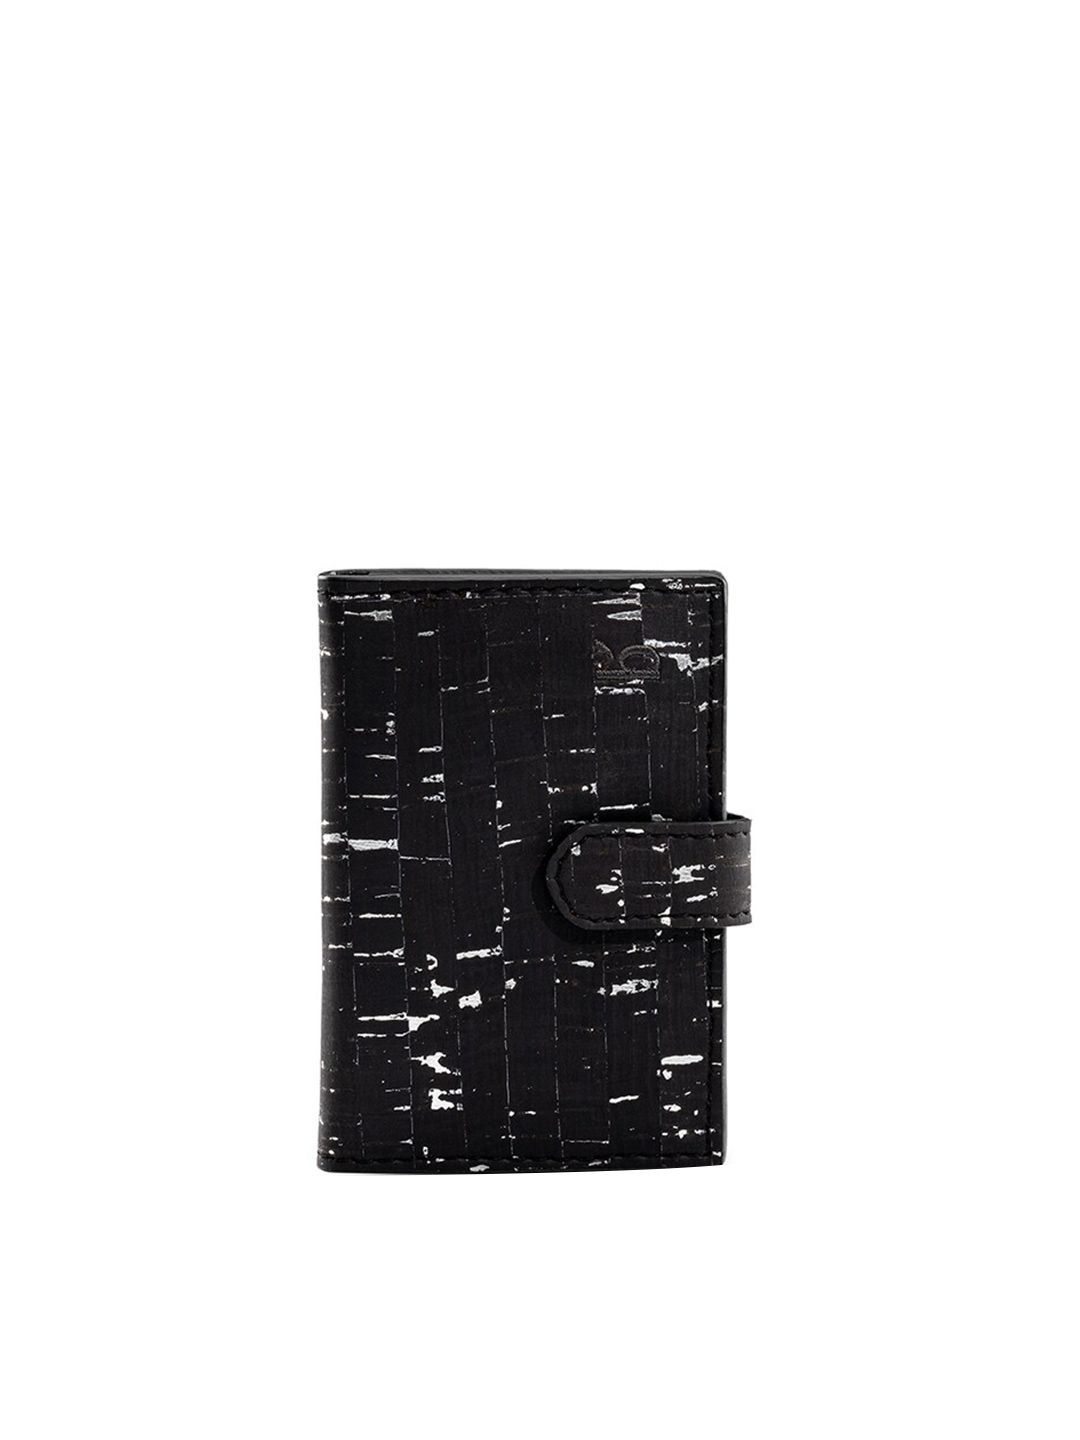 Beej Unisex Black & White Textured Two Fold Wallet Price in India